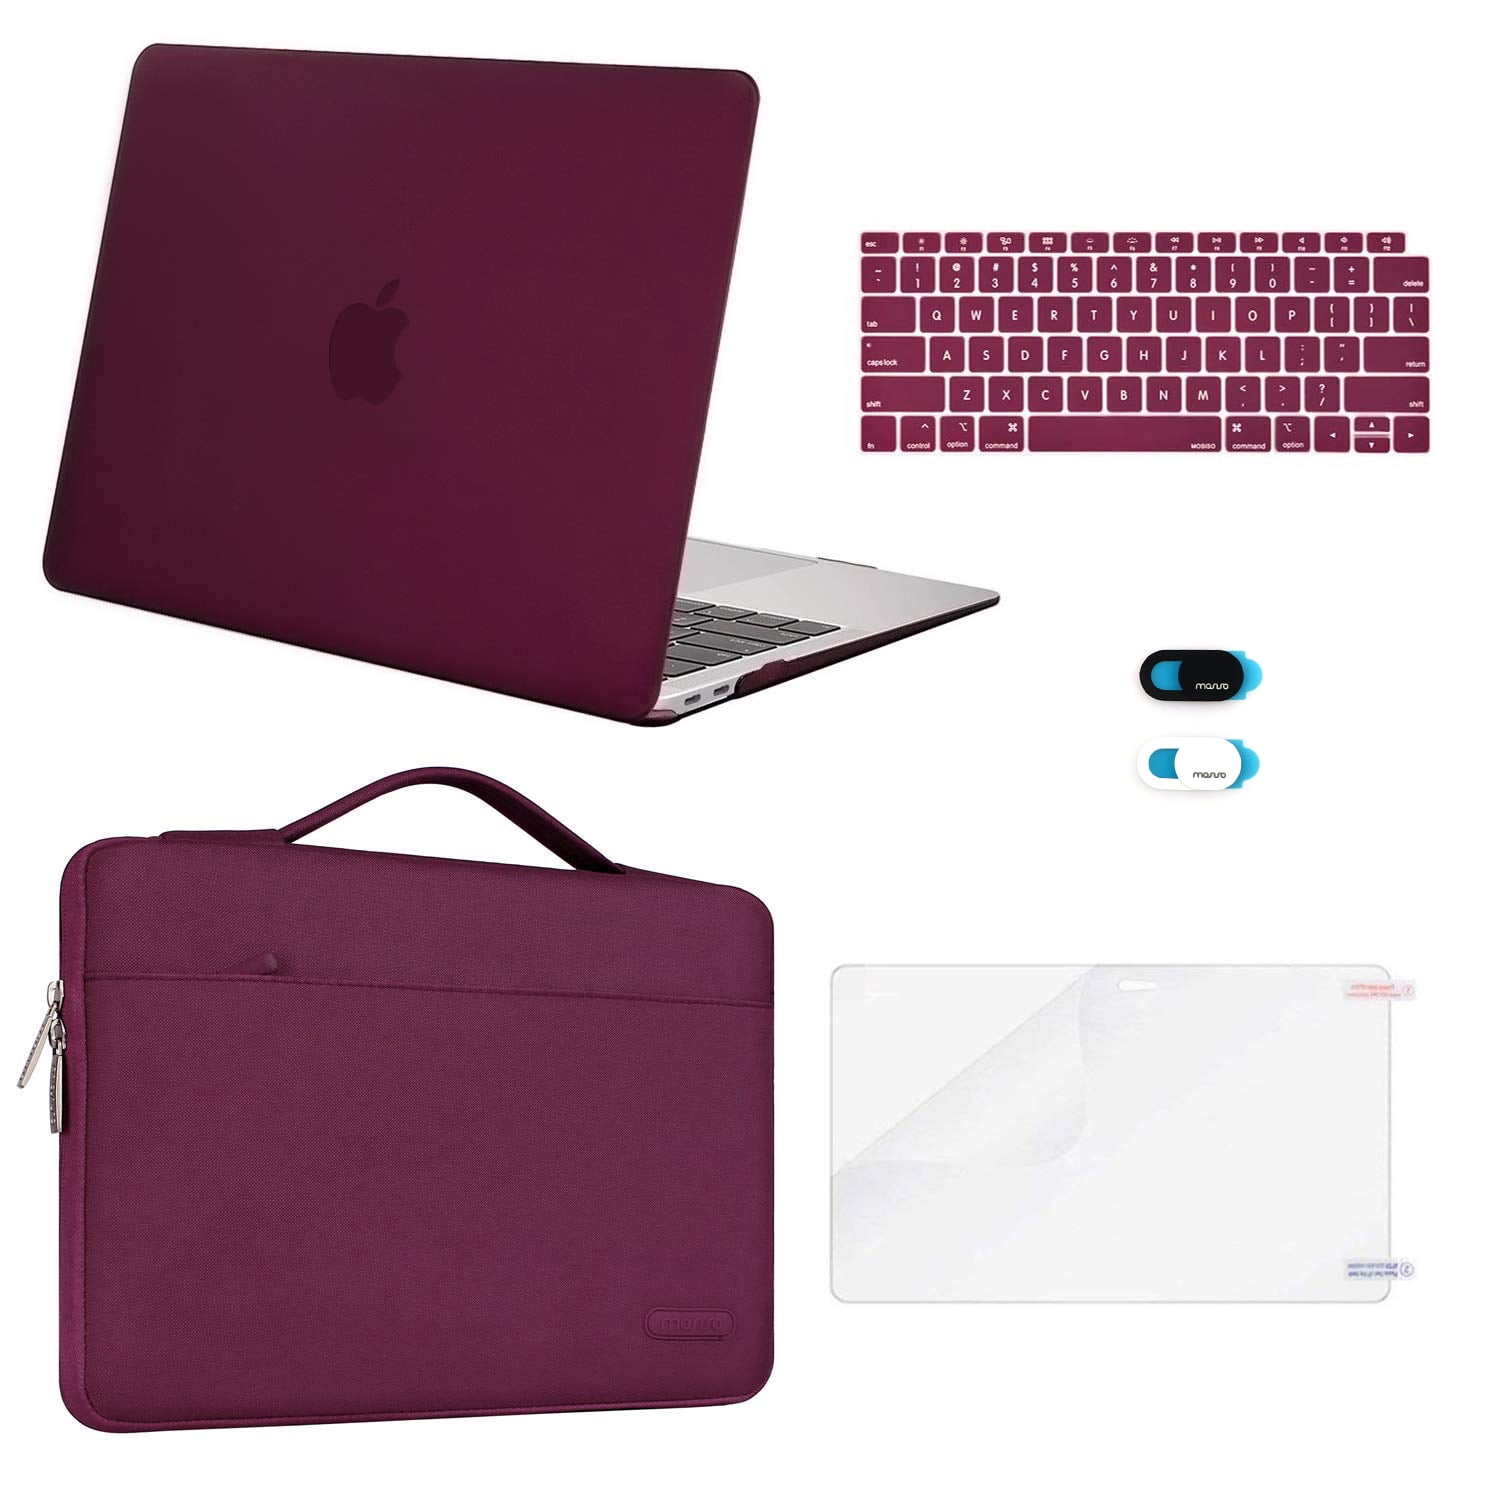 MOSISO 5 in 1 New MacBook Air 13 inch Case A1932 2019 2018 Release, Hard Case Shell Cover&Sleeve Bag for Apple MacBook Air 13'' with Retina Display